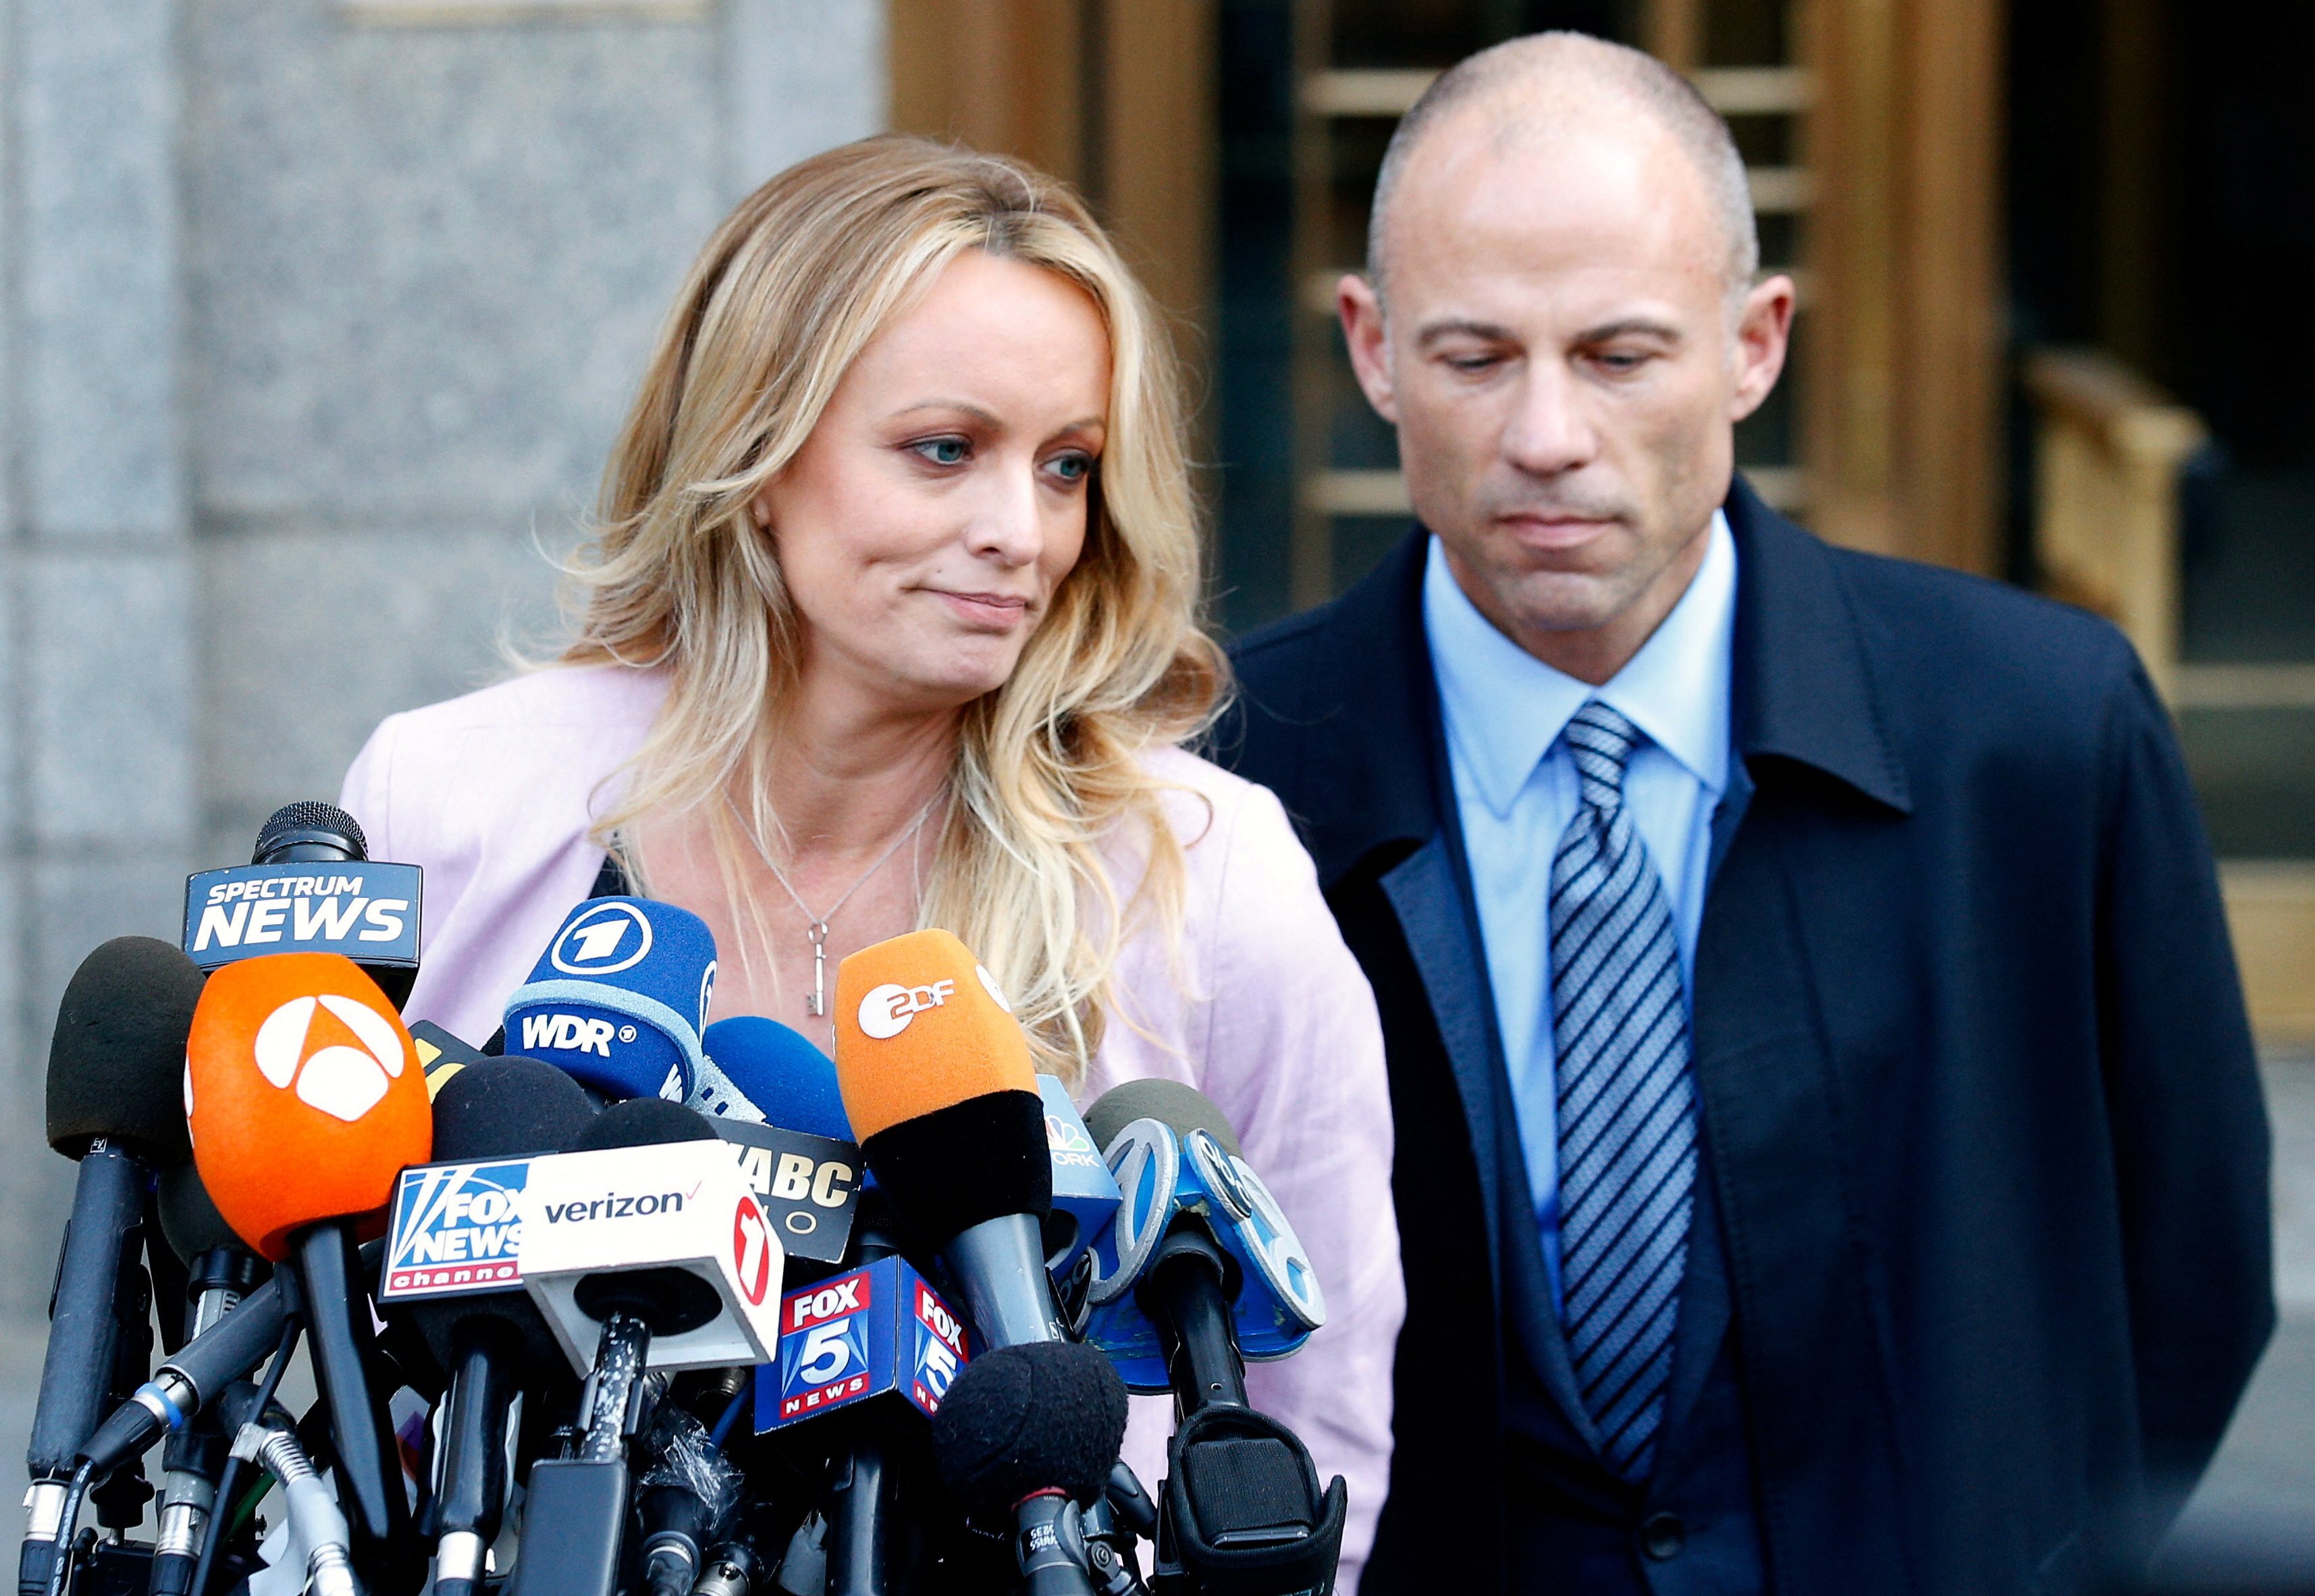 Adult film actress Stephanie Clifford, also known as Stormy Daniels, speaks to media along with lawyer Michael Avenatti in New York in April 2018. Photo: Reuters